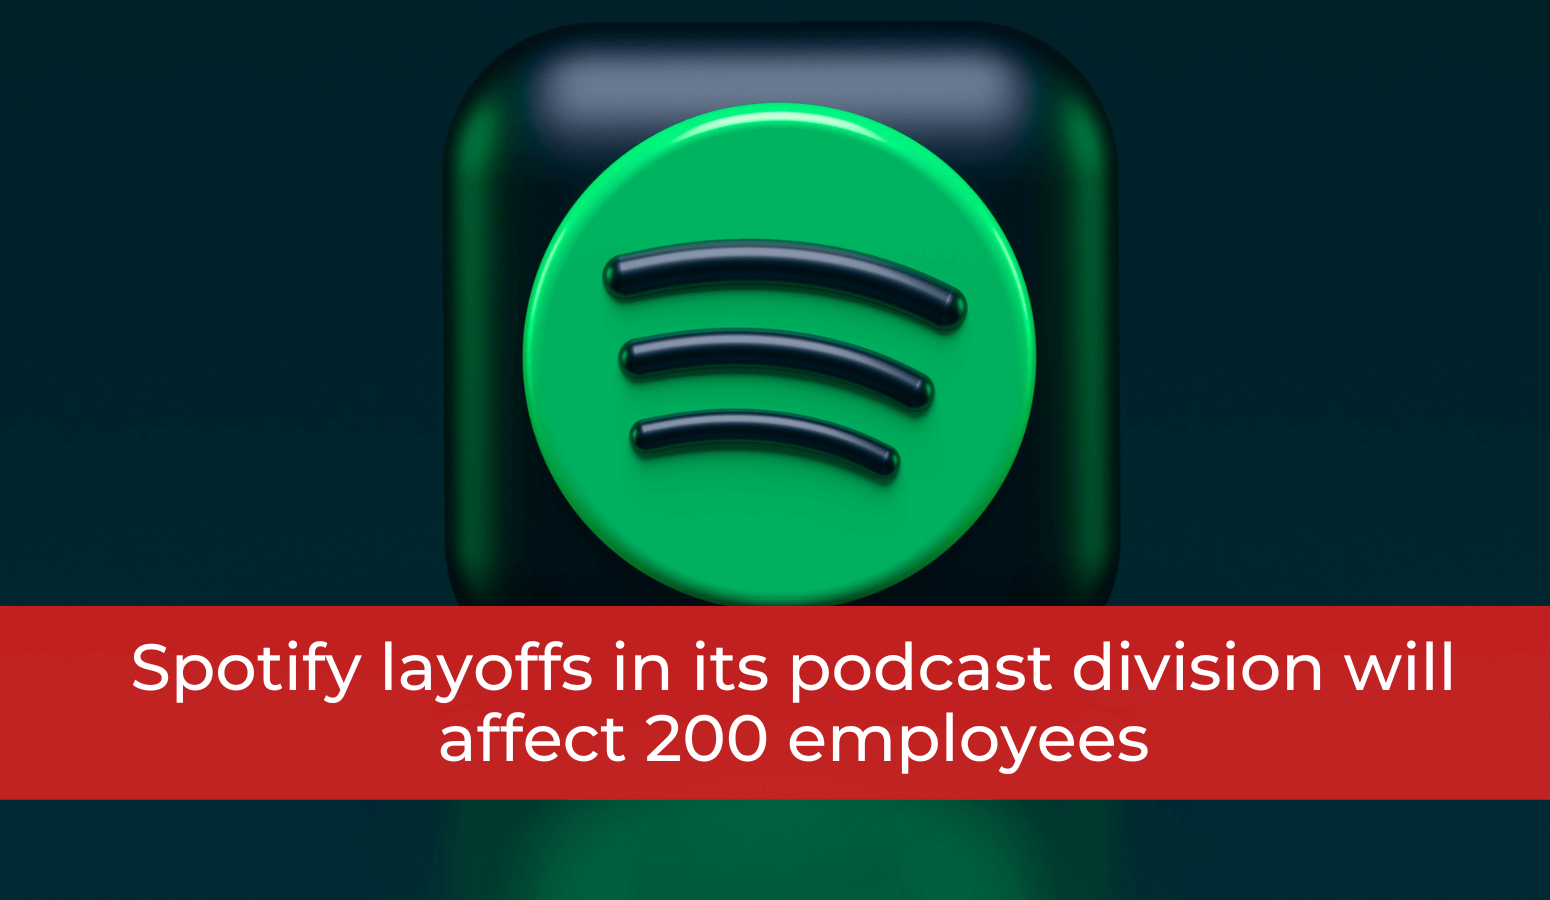 Featured image for “Spotify Layoffs in its Podcast Division will Affect 200 Employees”